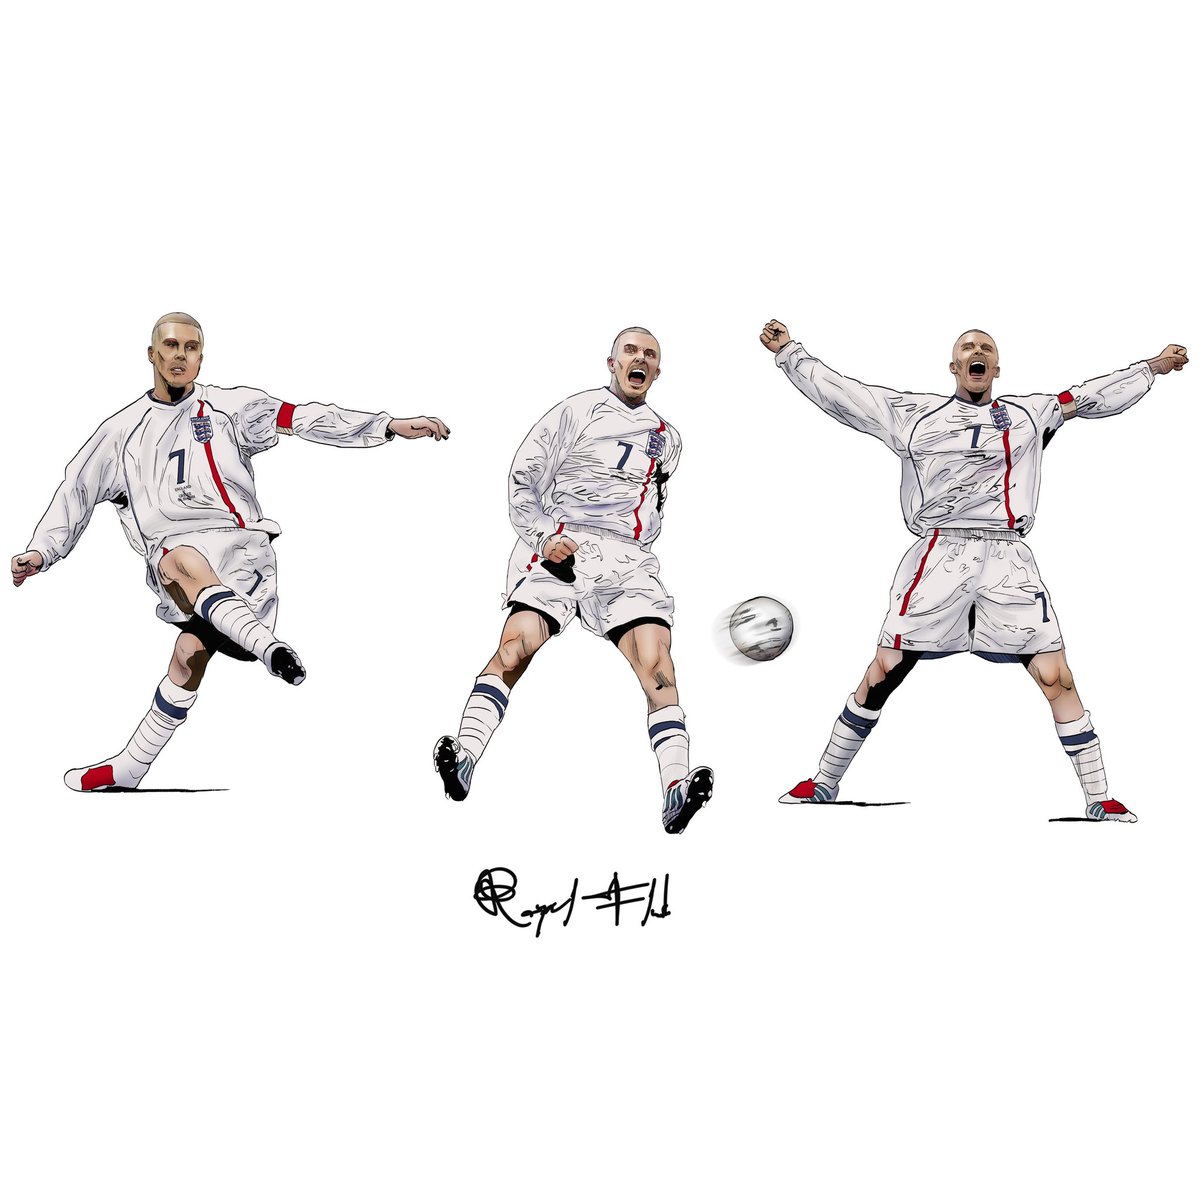 Beckham Motion. The hairstyles, the boots, the signature free kick, the fashion, the spice girl power couple. Get this design celebrating his incredible freekick to take England to the World Cup. With the euros coming this summer. royalflushdesigns.co.uk/search?q=beckh… #RoyalFlushDesigns